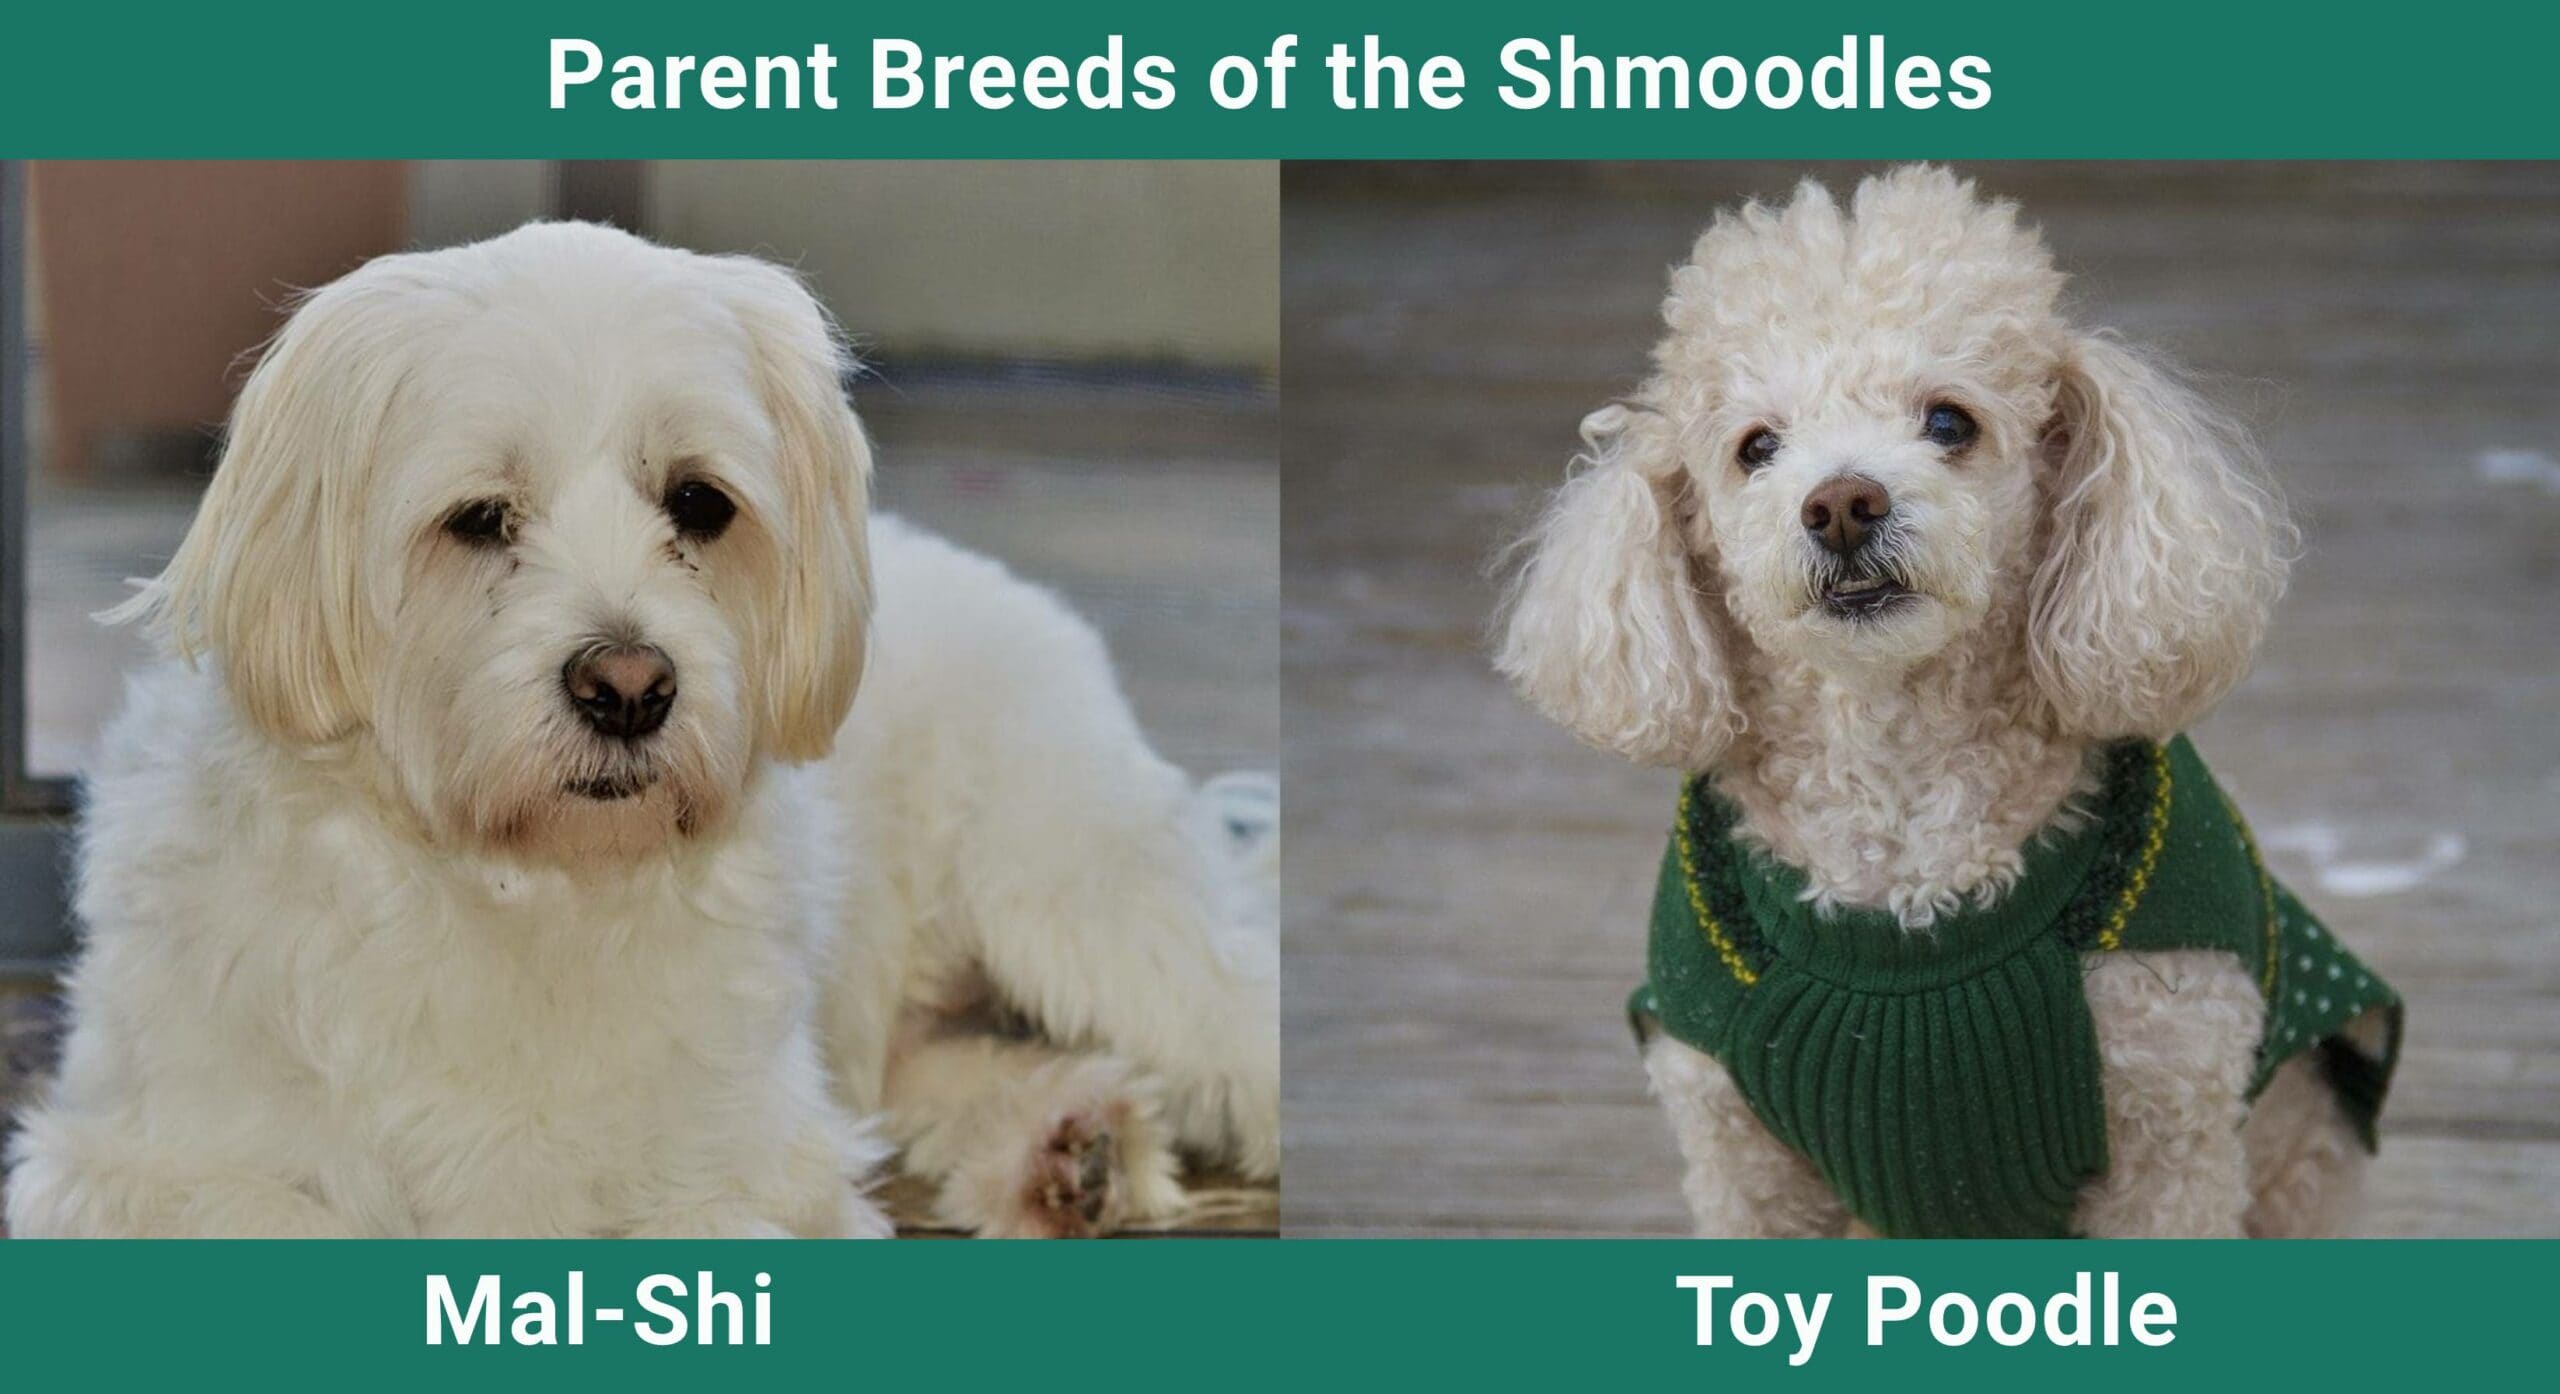 Parent breeds of the Shmoodle